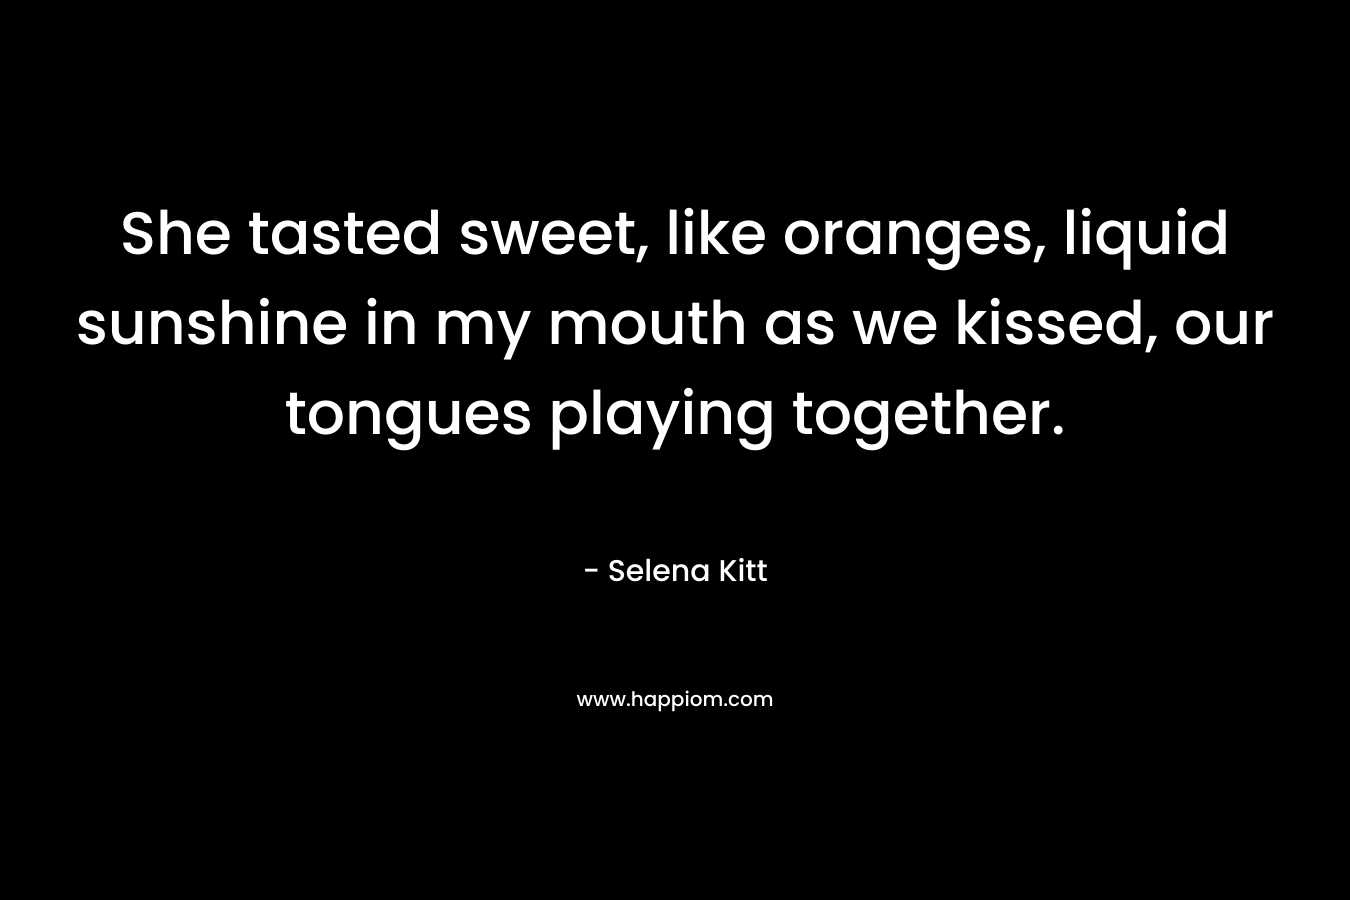 She tasted sweet, like oranges, liquid sunshine in my mouth as we kissed, our tongues playing together. – Selena Kitt